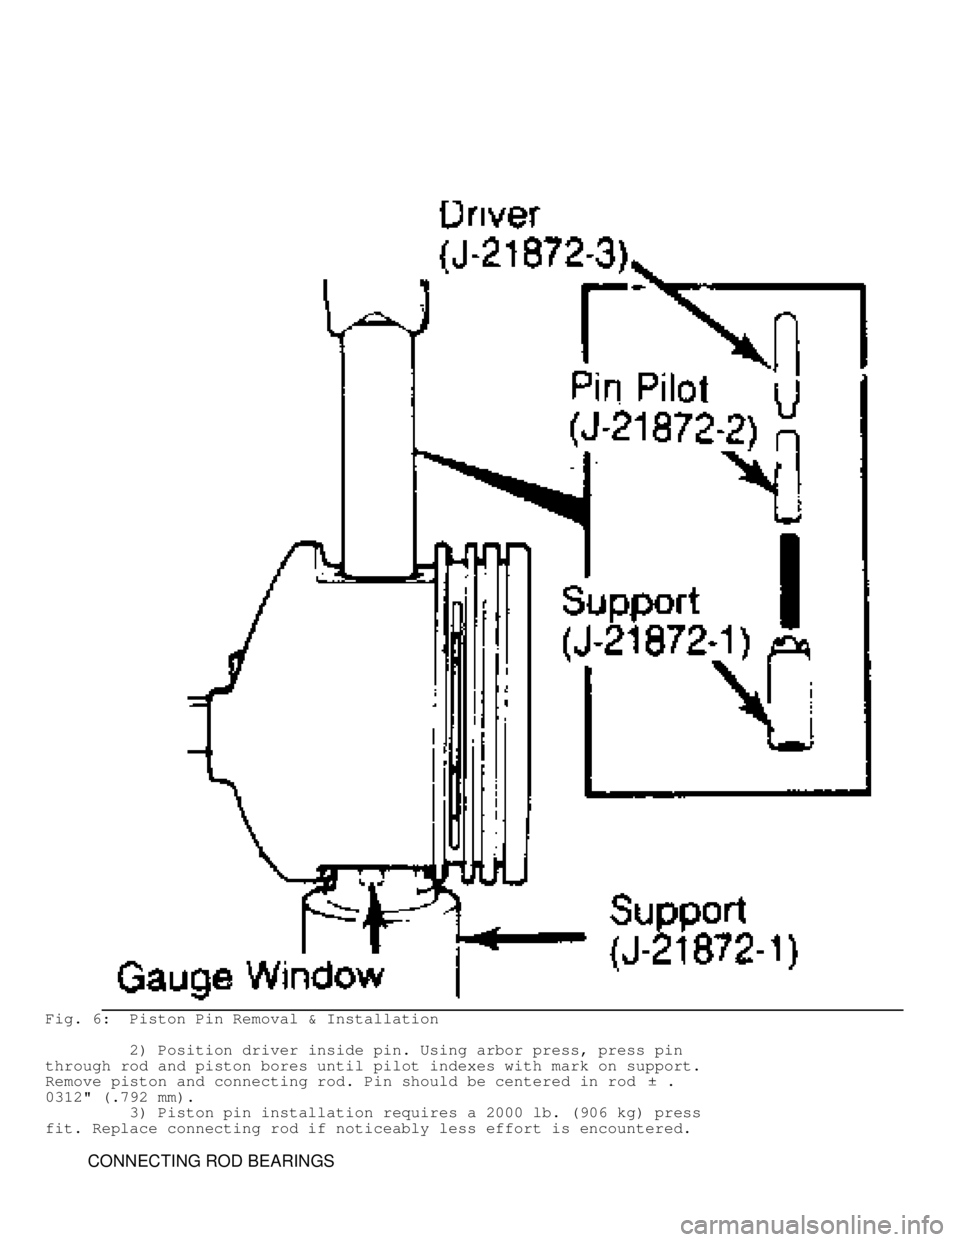 JEEP CHEROKEE 1988  Service Repair Manual Fig. 6:  Piston Pin Removal & Installation
         2) Position driver inside pin. Using arbor press, press pin
through rod and piston bores until pilot indexes with mark on support.
Remove piston and